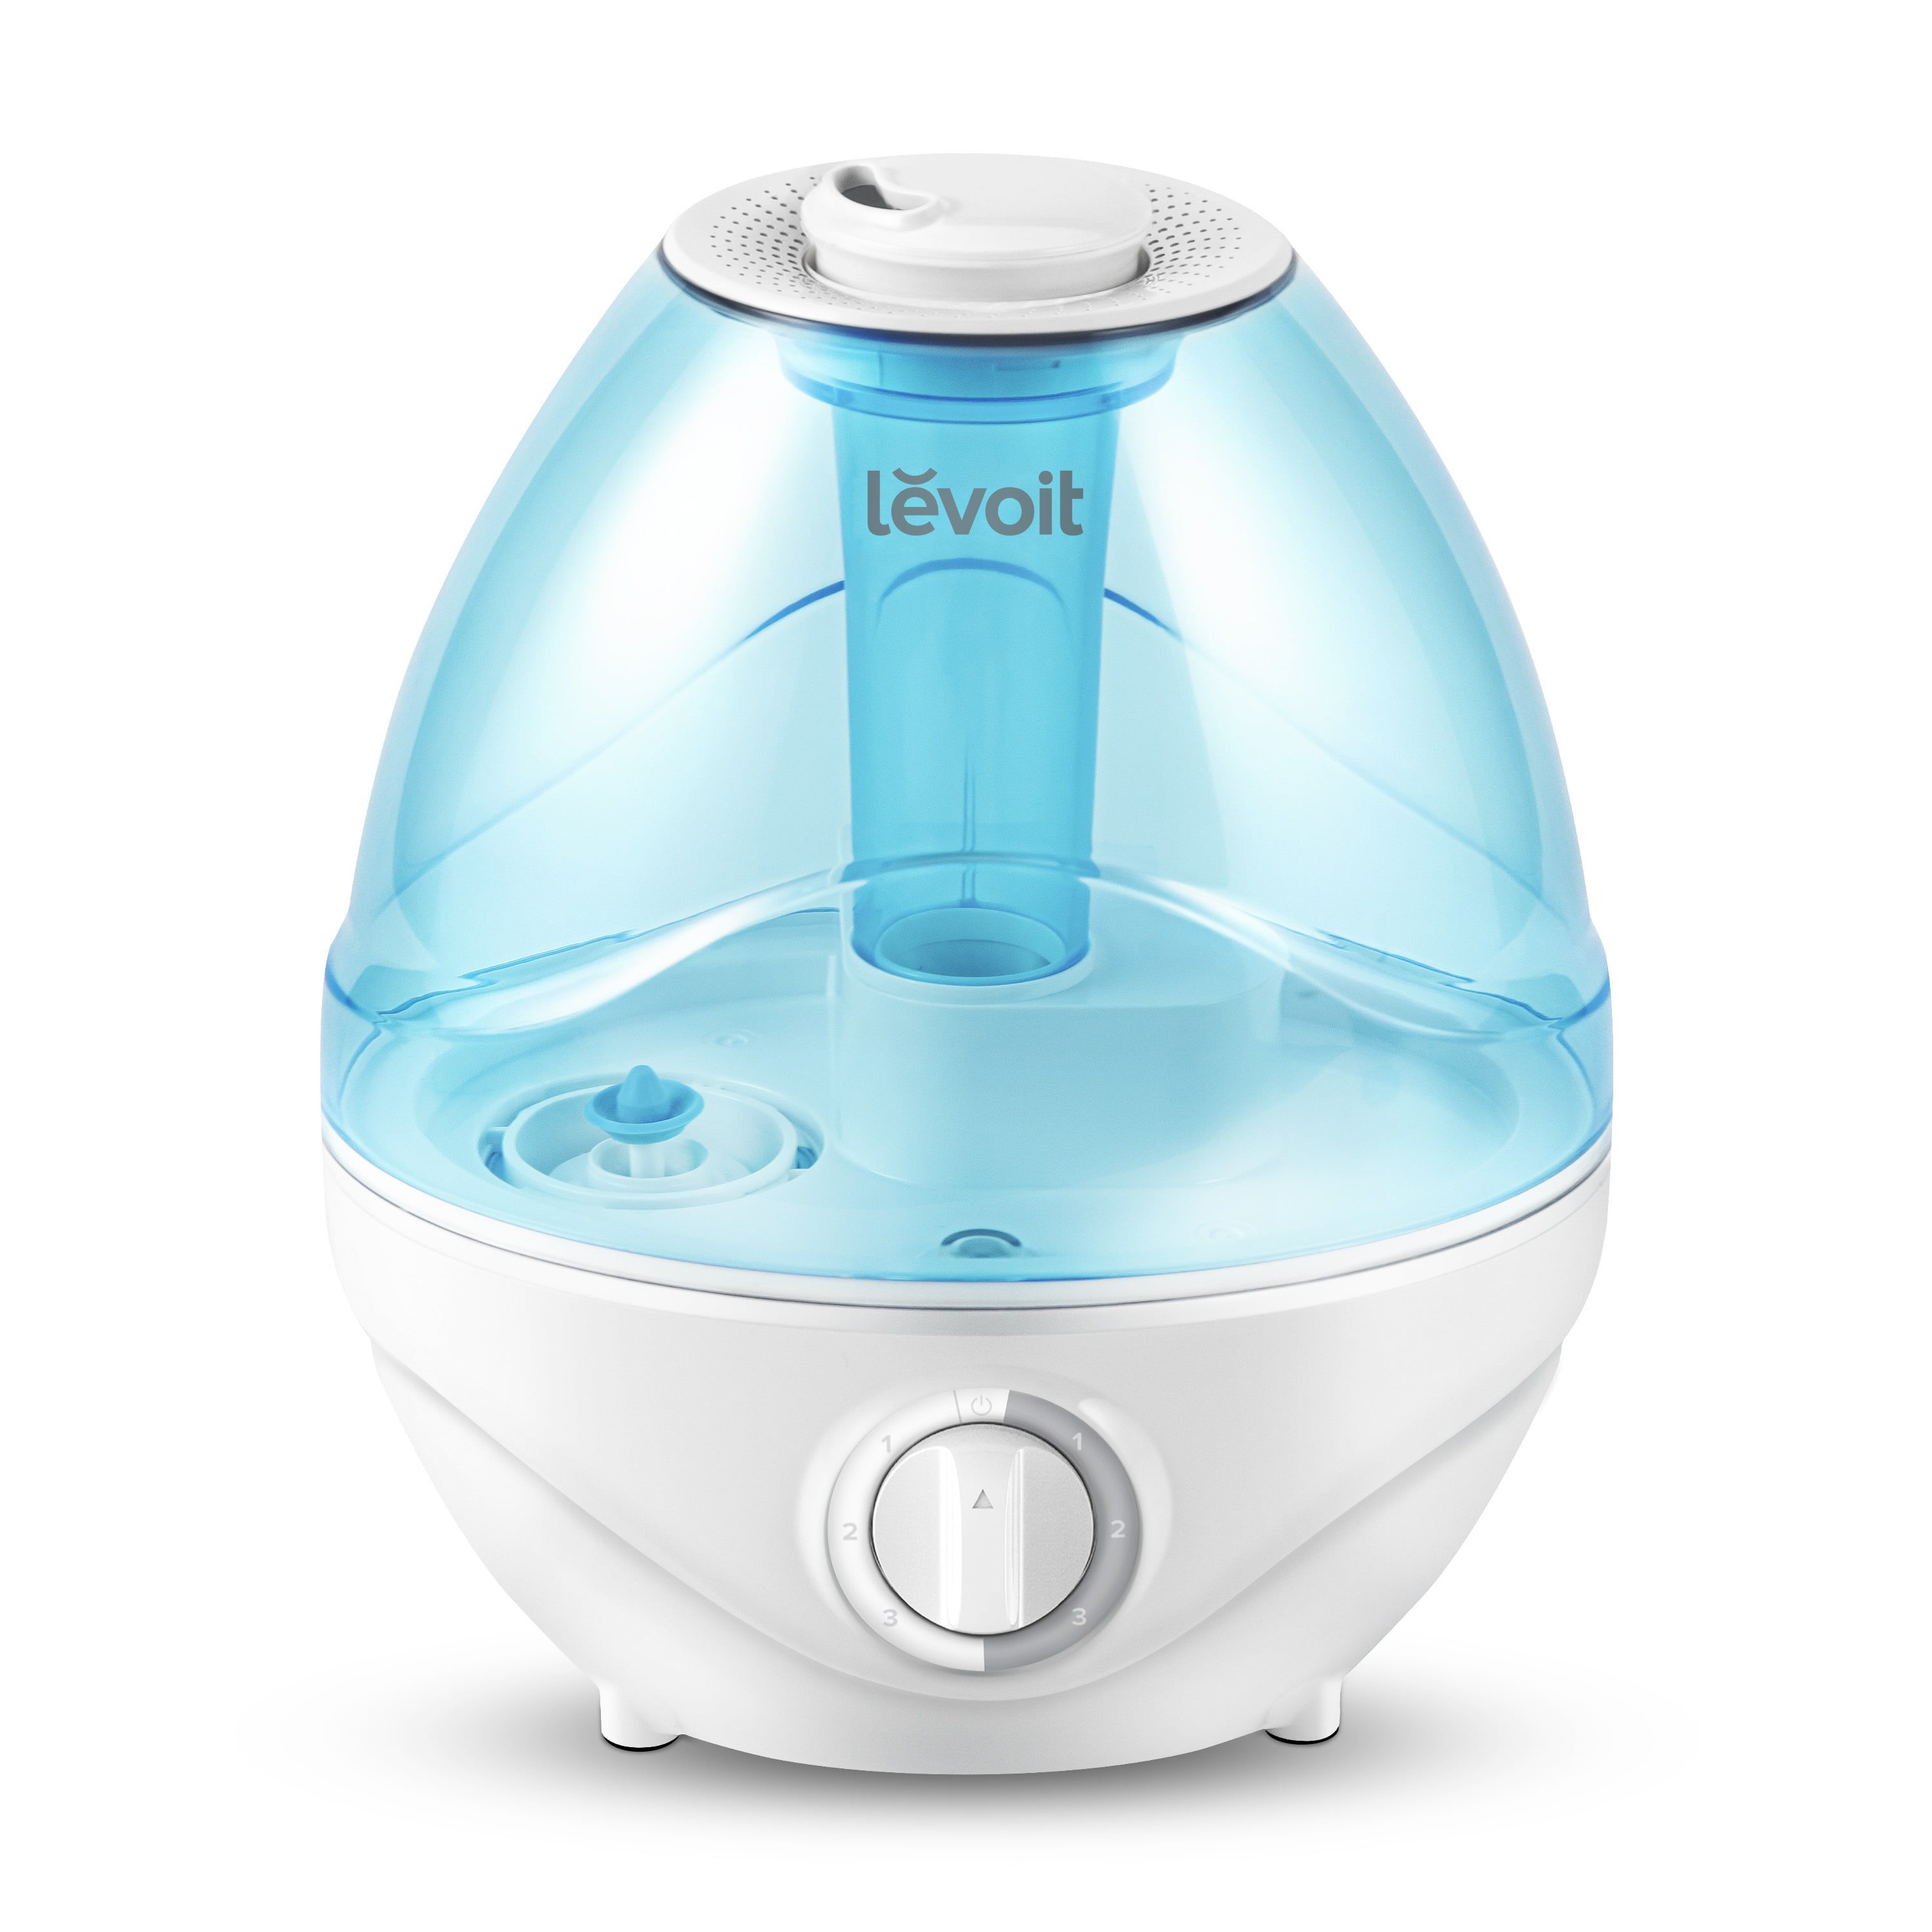 Levoit 2.4L 290 sq ft Ultrasonic Mist Humidifier, White and Blue - image 1 of 17